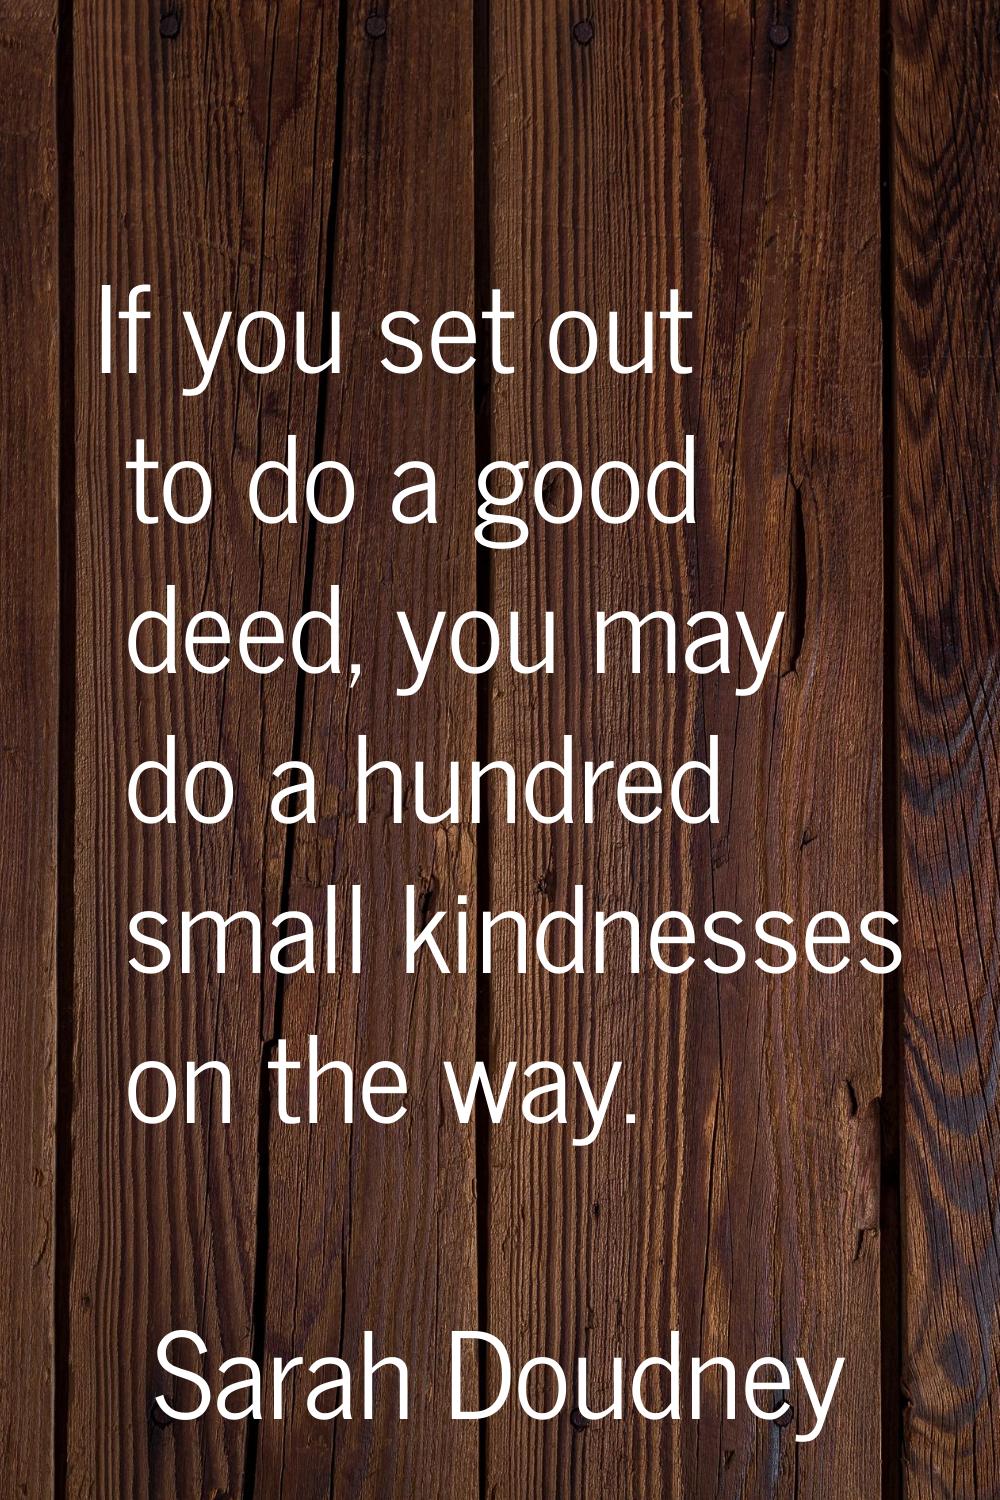 If you set out to do a good deed, you may do a hundred small kindnesses on the way.